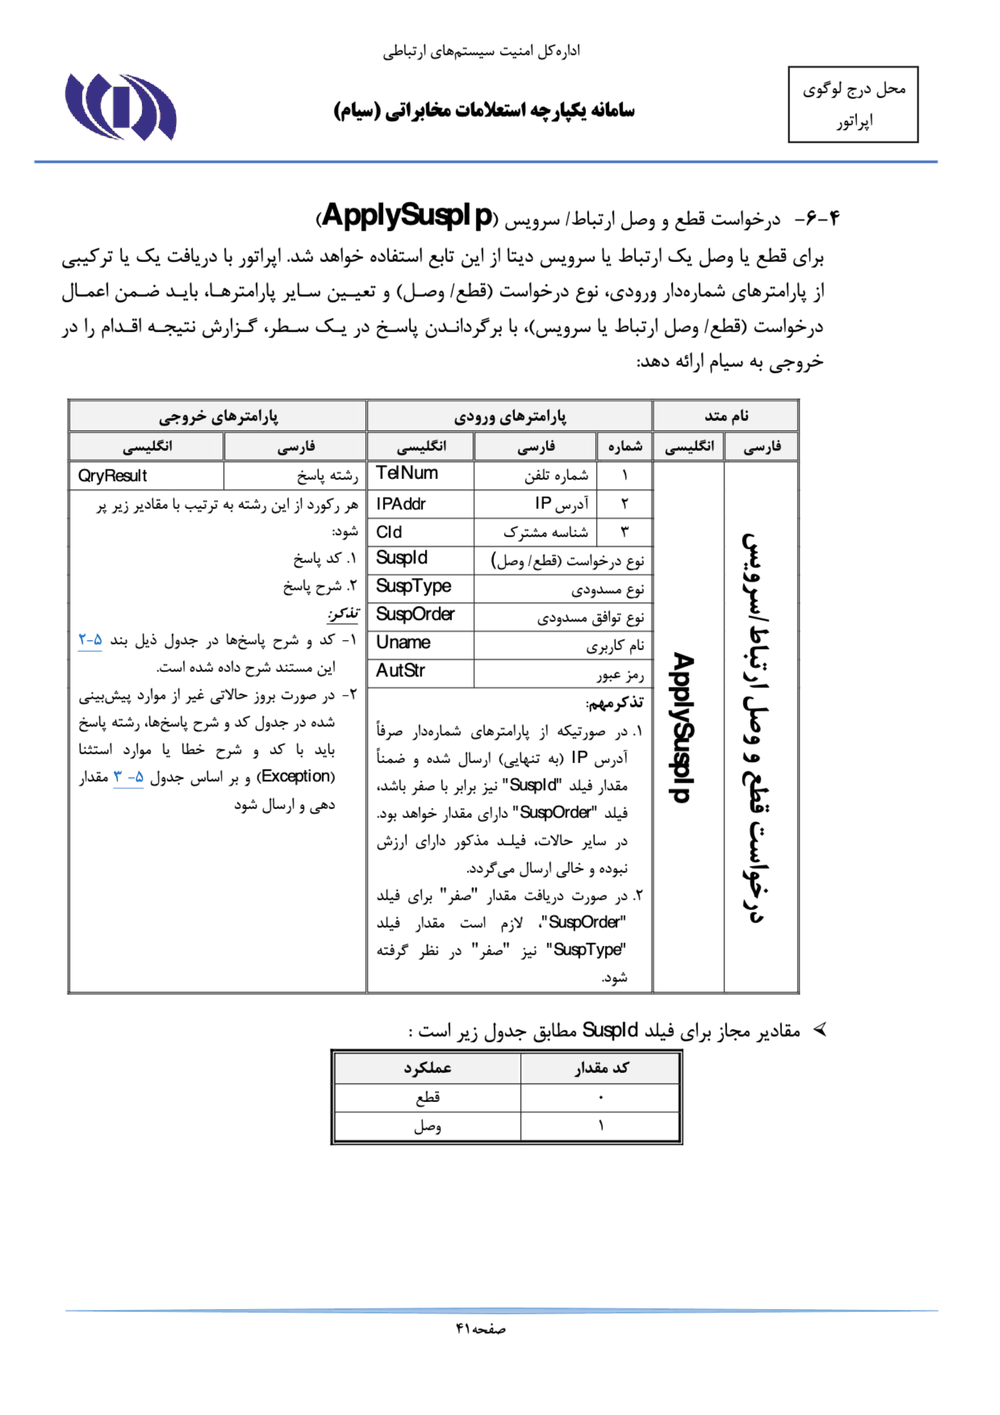 Page 41 from Iran’s SIAM Manual in Persian for Tracking and Controlling Mobile Phones